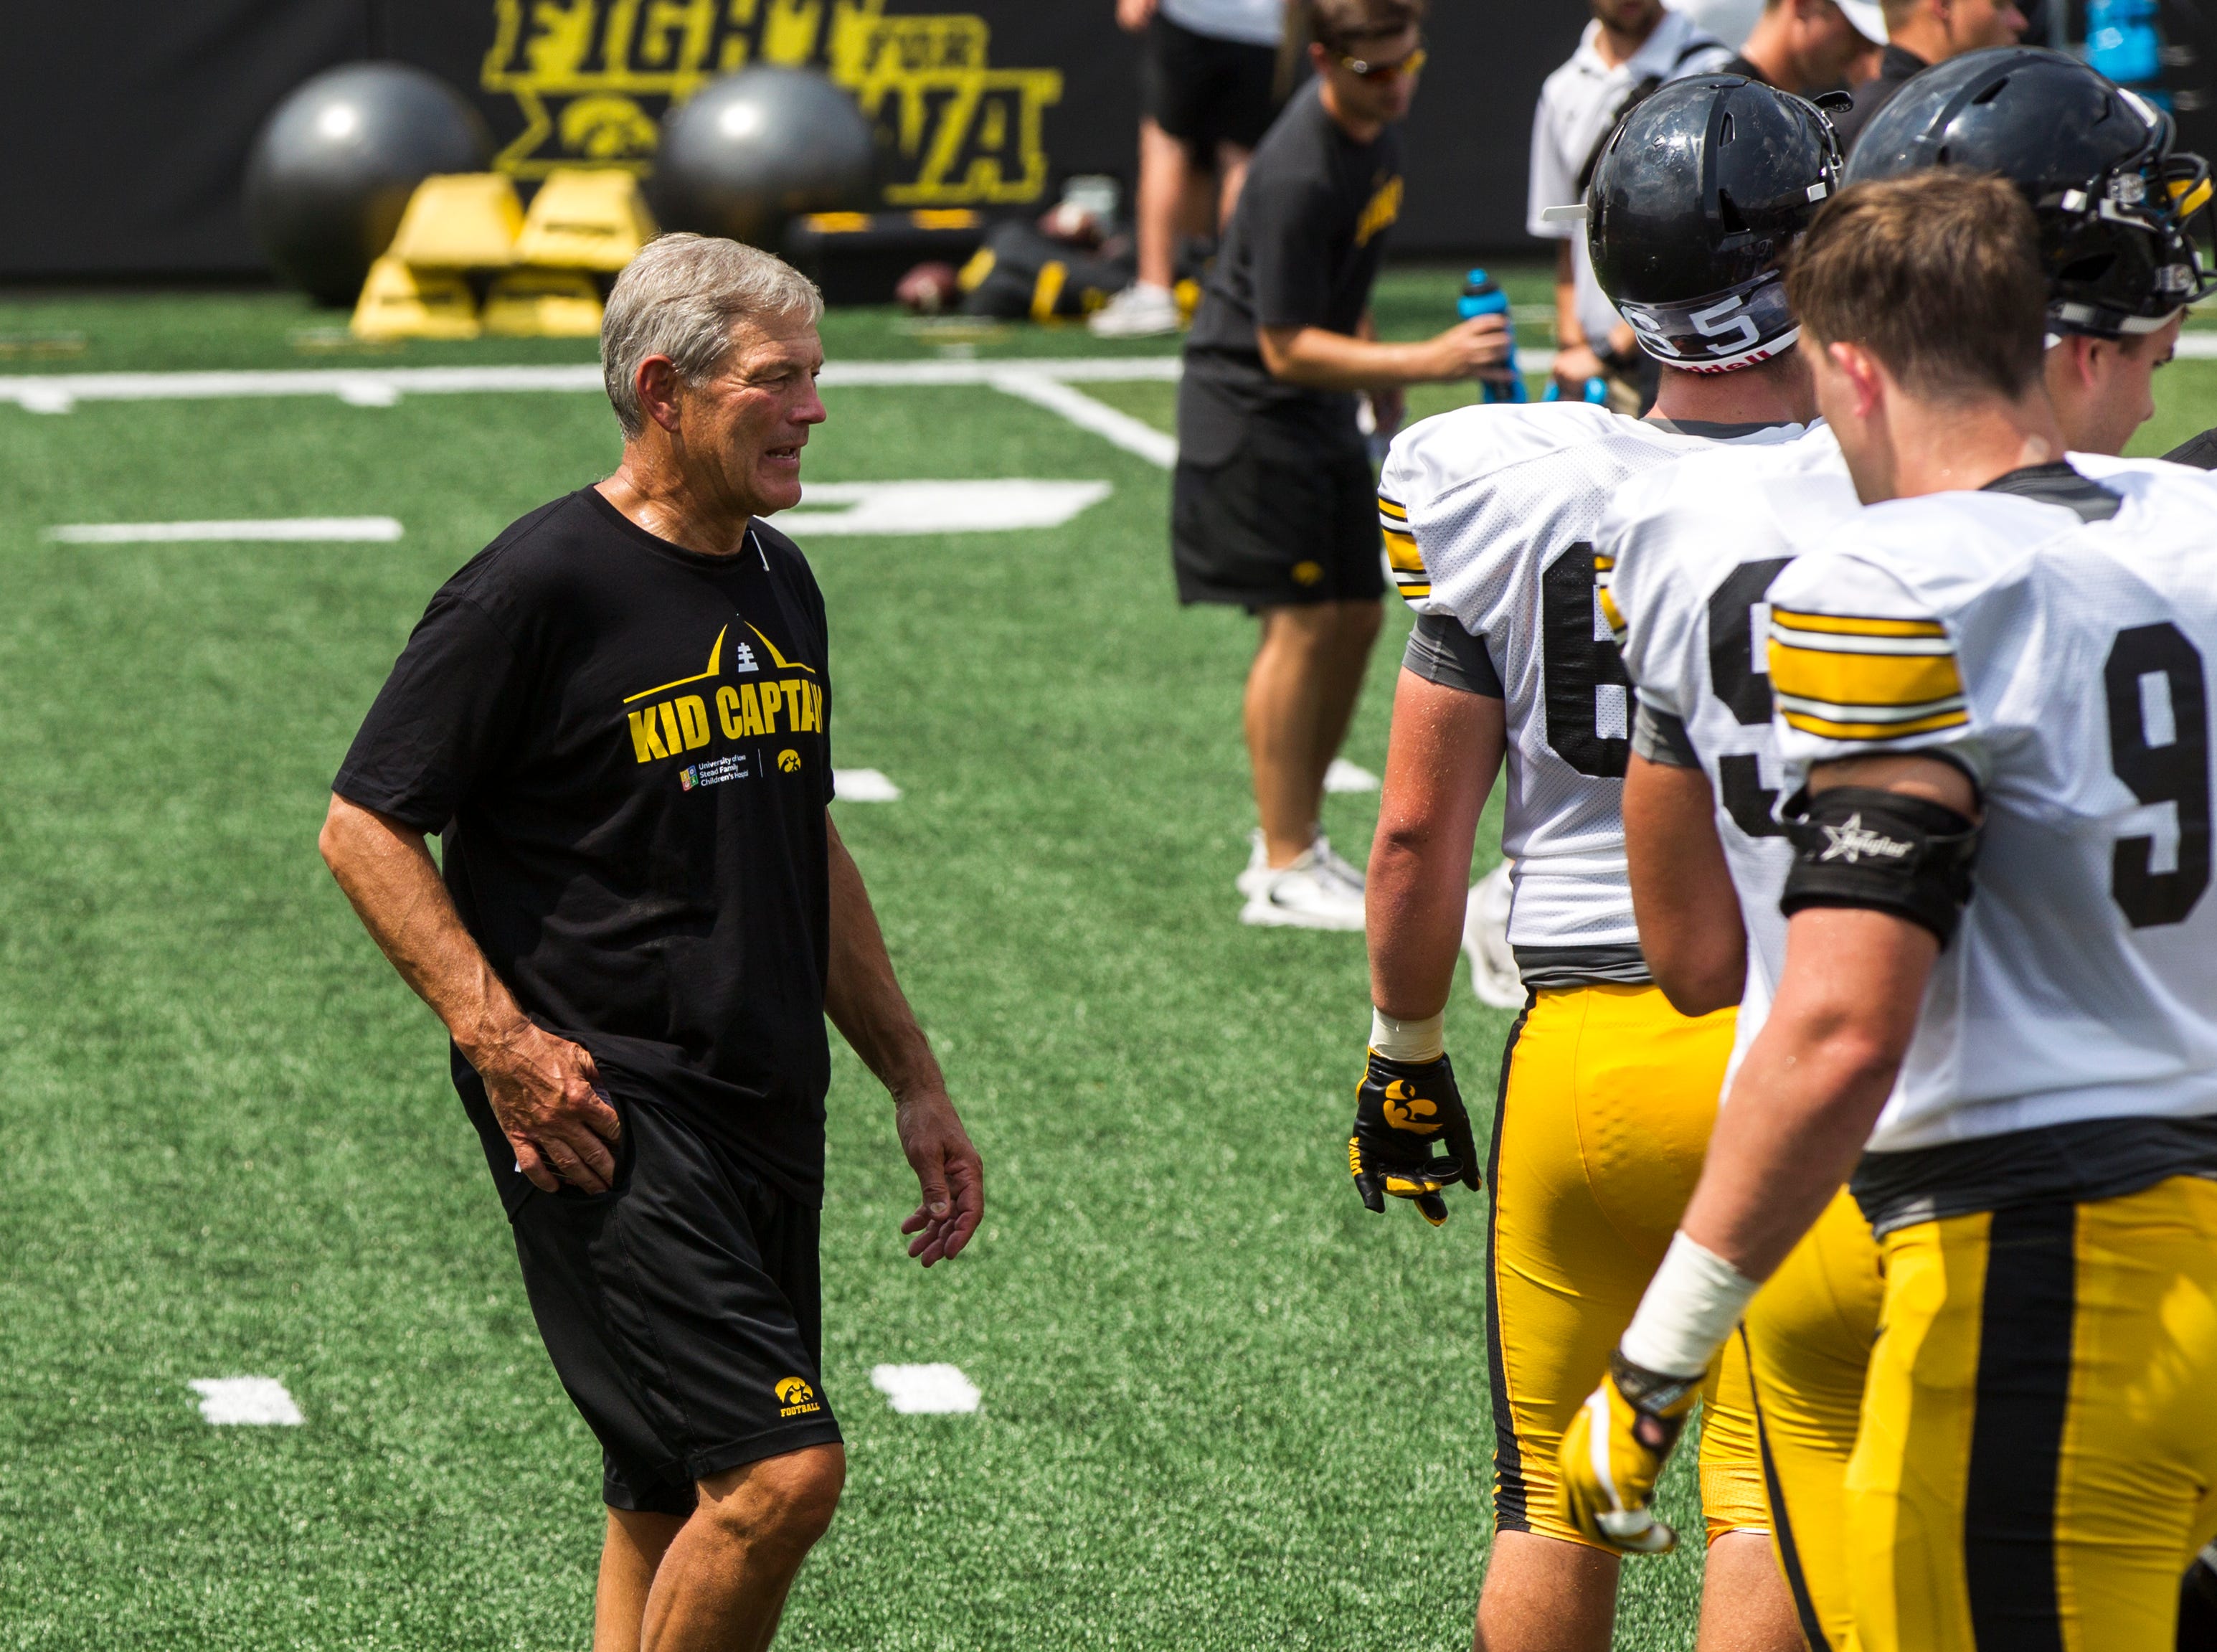 Iowa football head coach Kirk Ferentz talks with members of the defense during a Kids Day practice on Saturday, Aug. 11, 2018, at Kinnick Stadium in Iowa City.